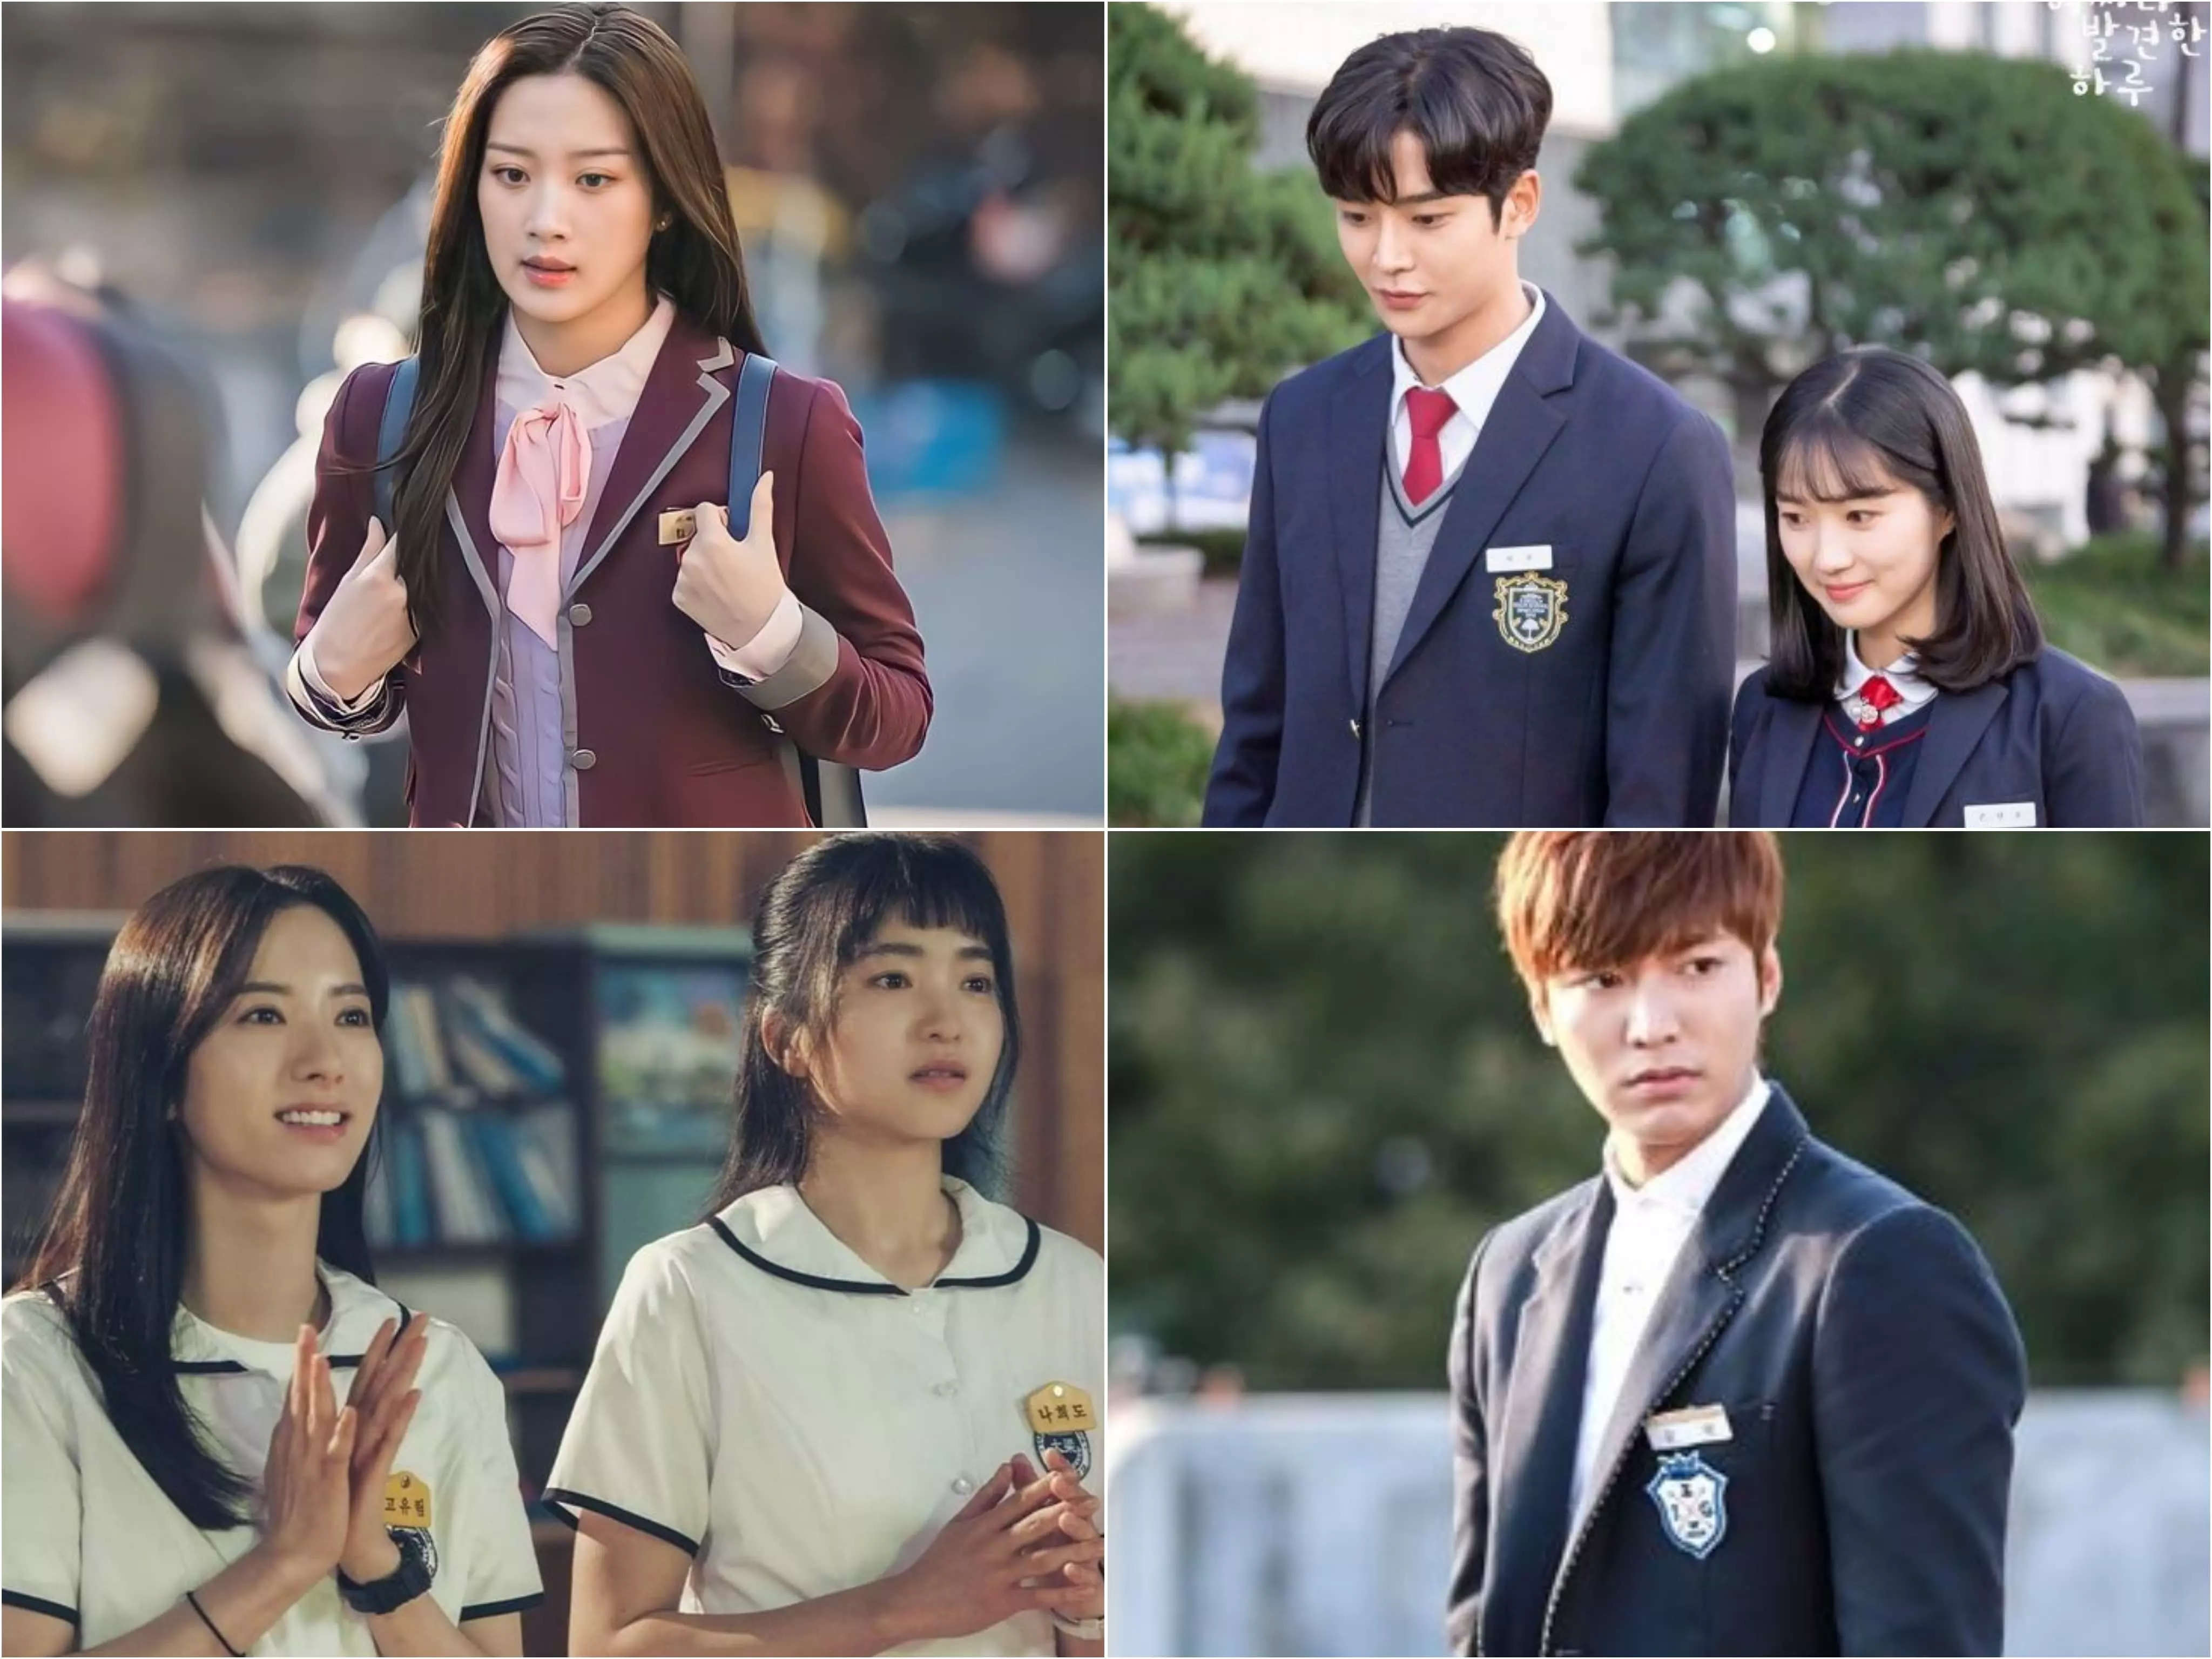 True beauty, The Heirs, Extraordinary you and more: Romantic K-dramas set in high schools